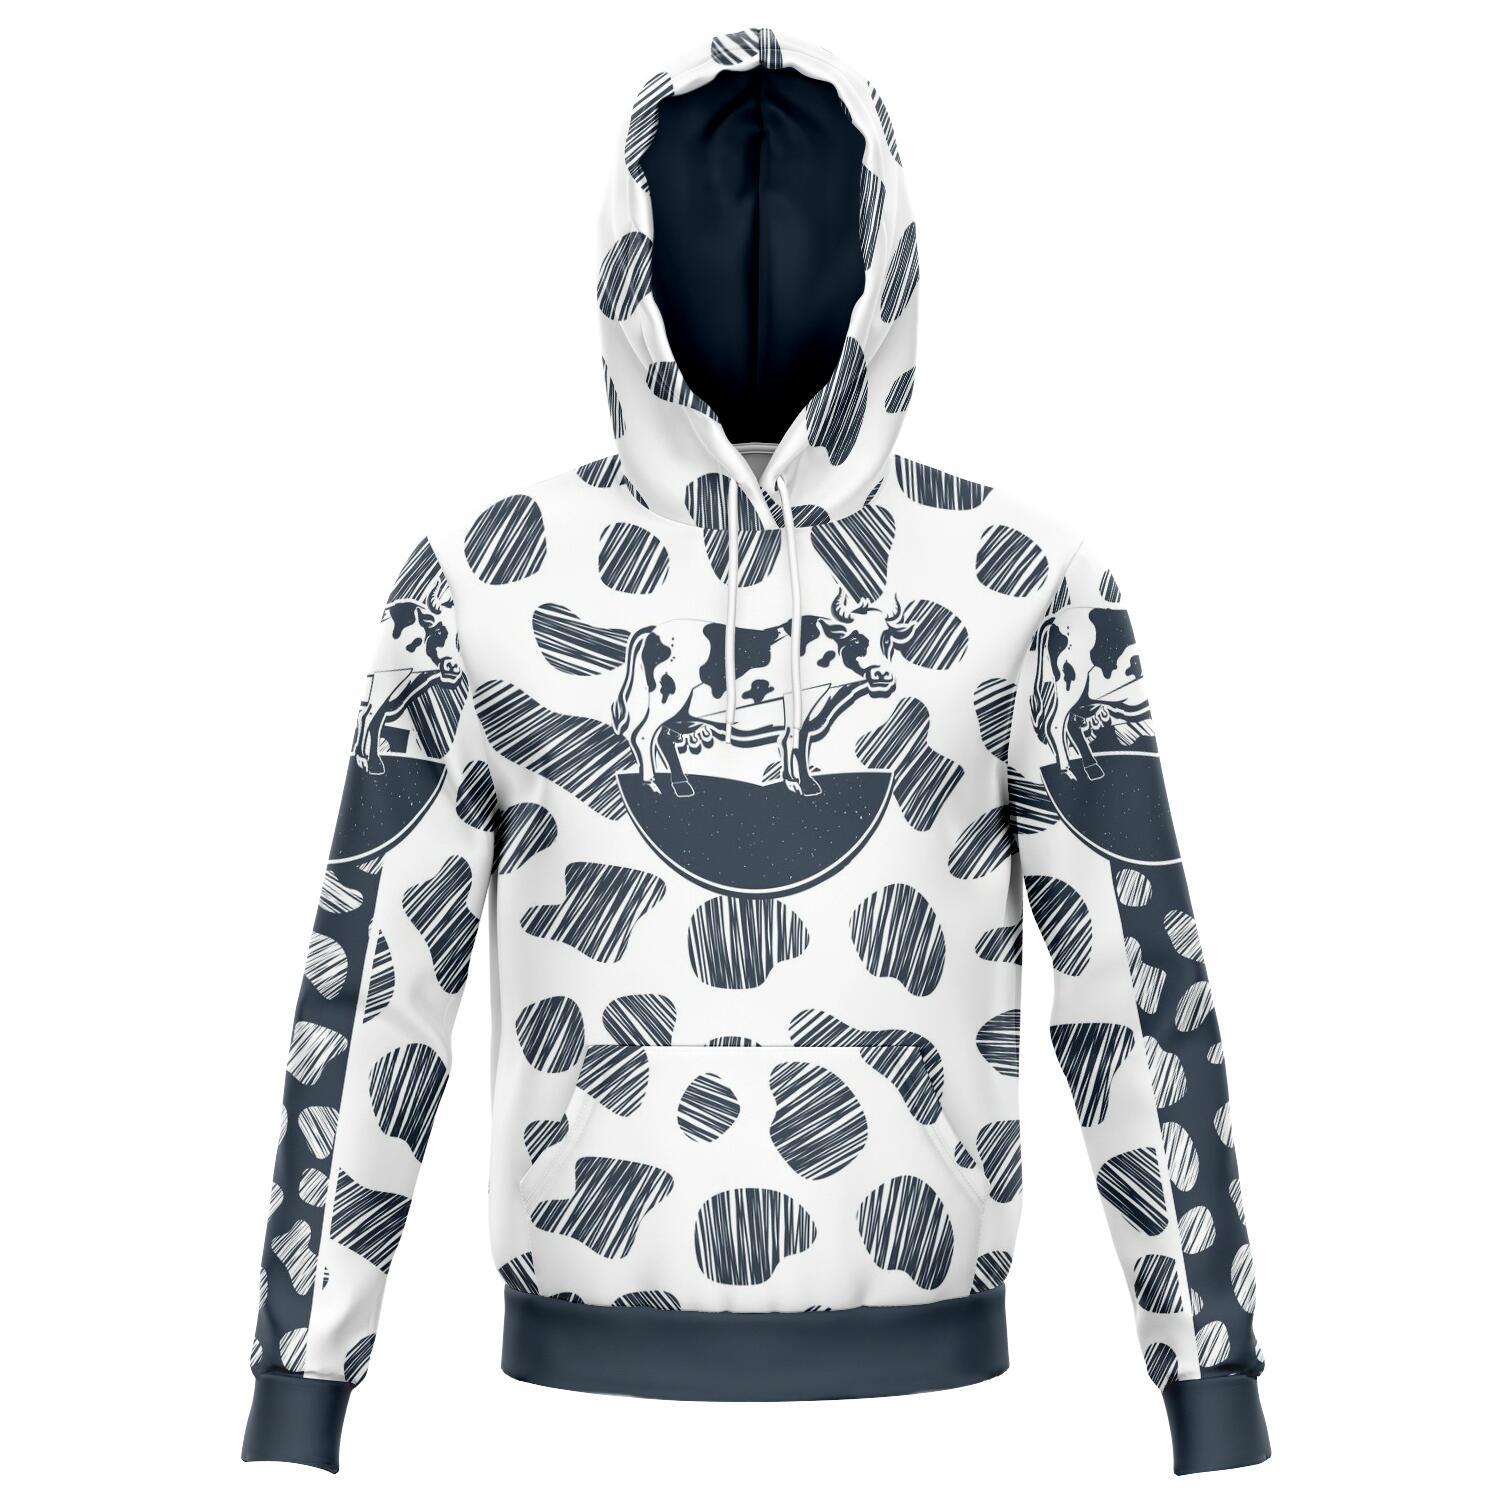 Sketchy Cow Print Hoodie CL1211 XS Official COW PRINT Merch